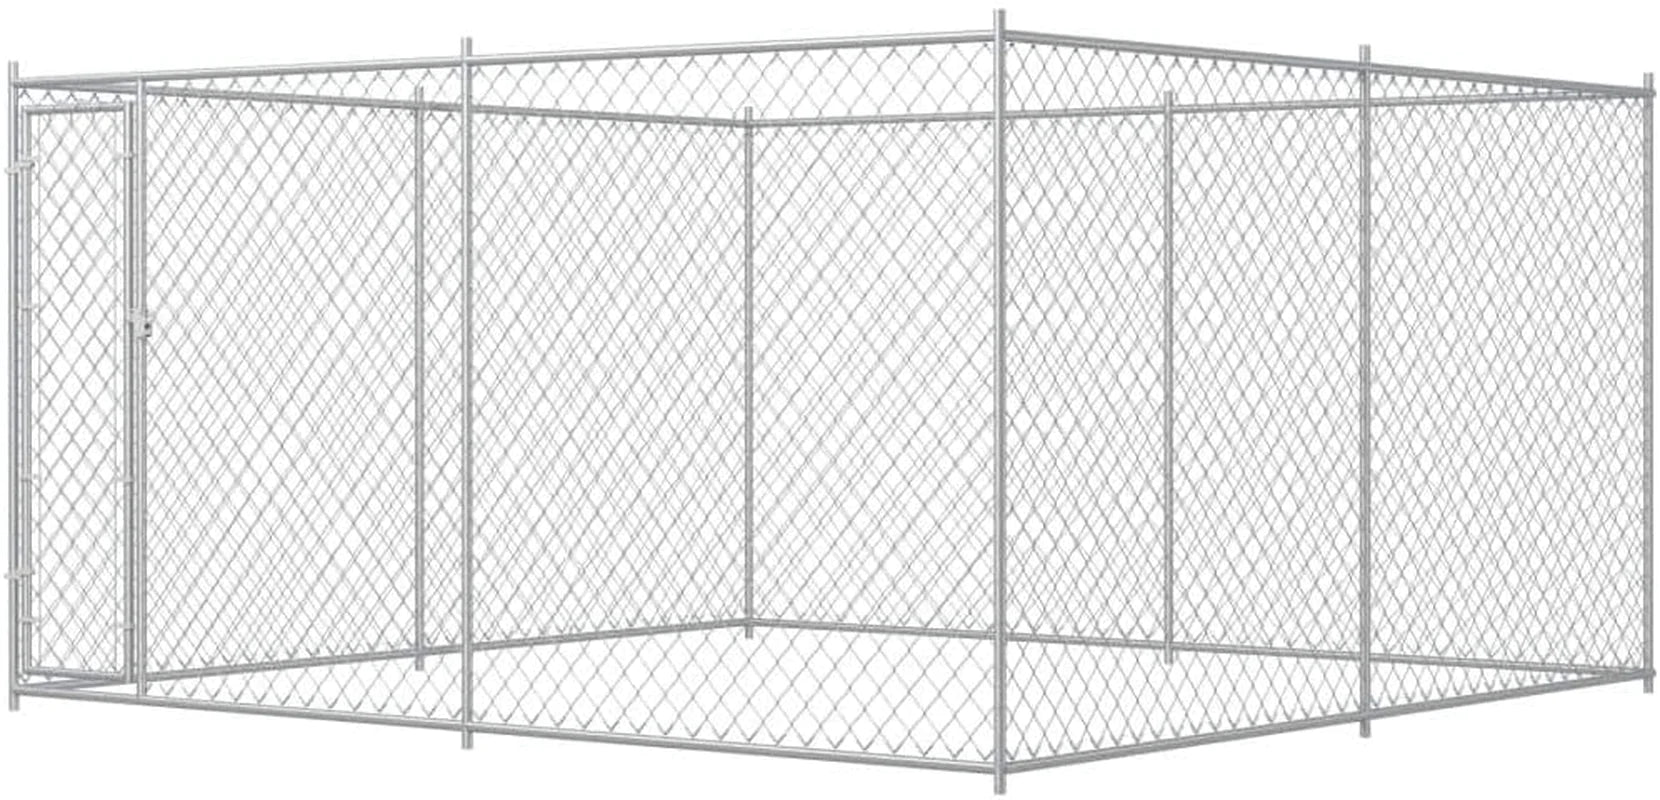 Vidaxl Outdoor Dog Kennel Garden Pet Exercise Playpen Playing Training Exercising Run Cage Play Paradise House Fence 13.1'X13.1'X6.6' Animals & Pet Supplies > Pet Supplies > Dog Supplies > Dog Kennels & Runs vidaXL   